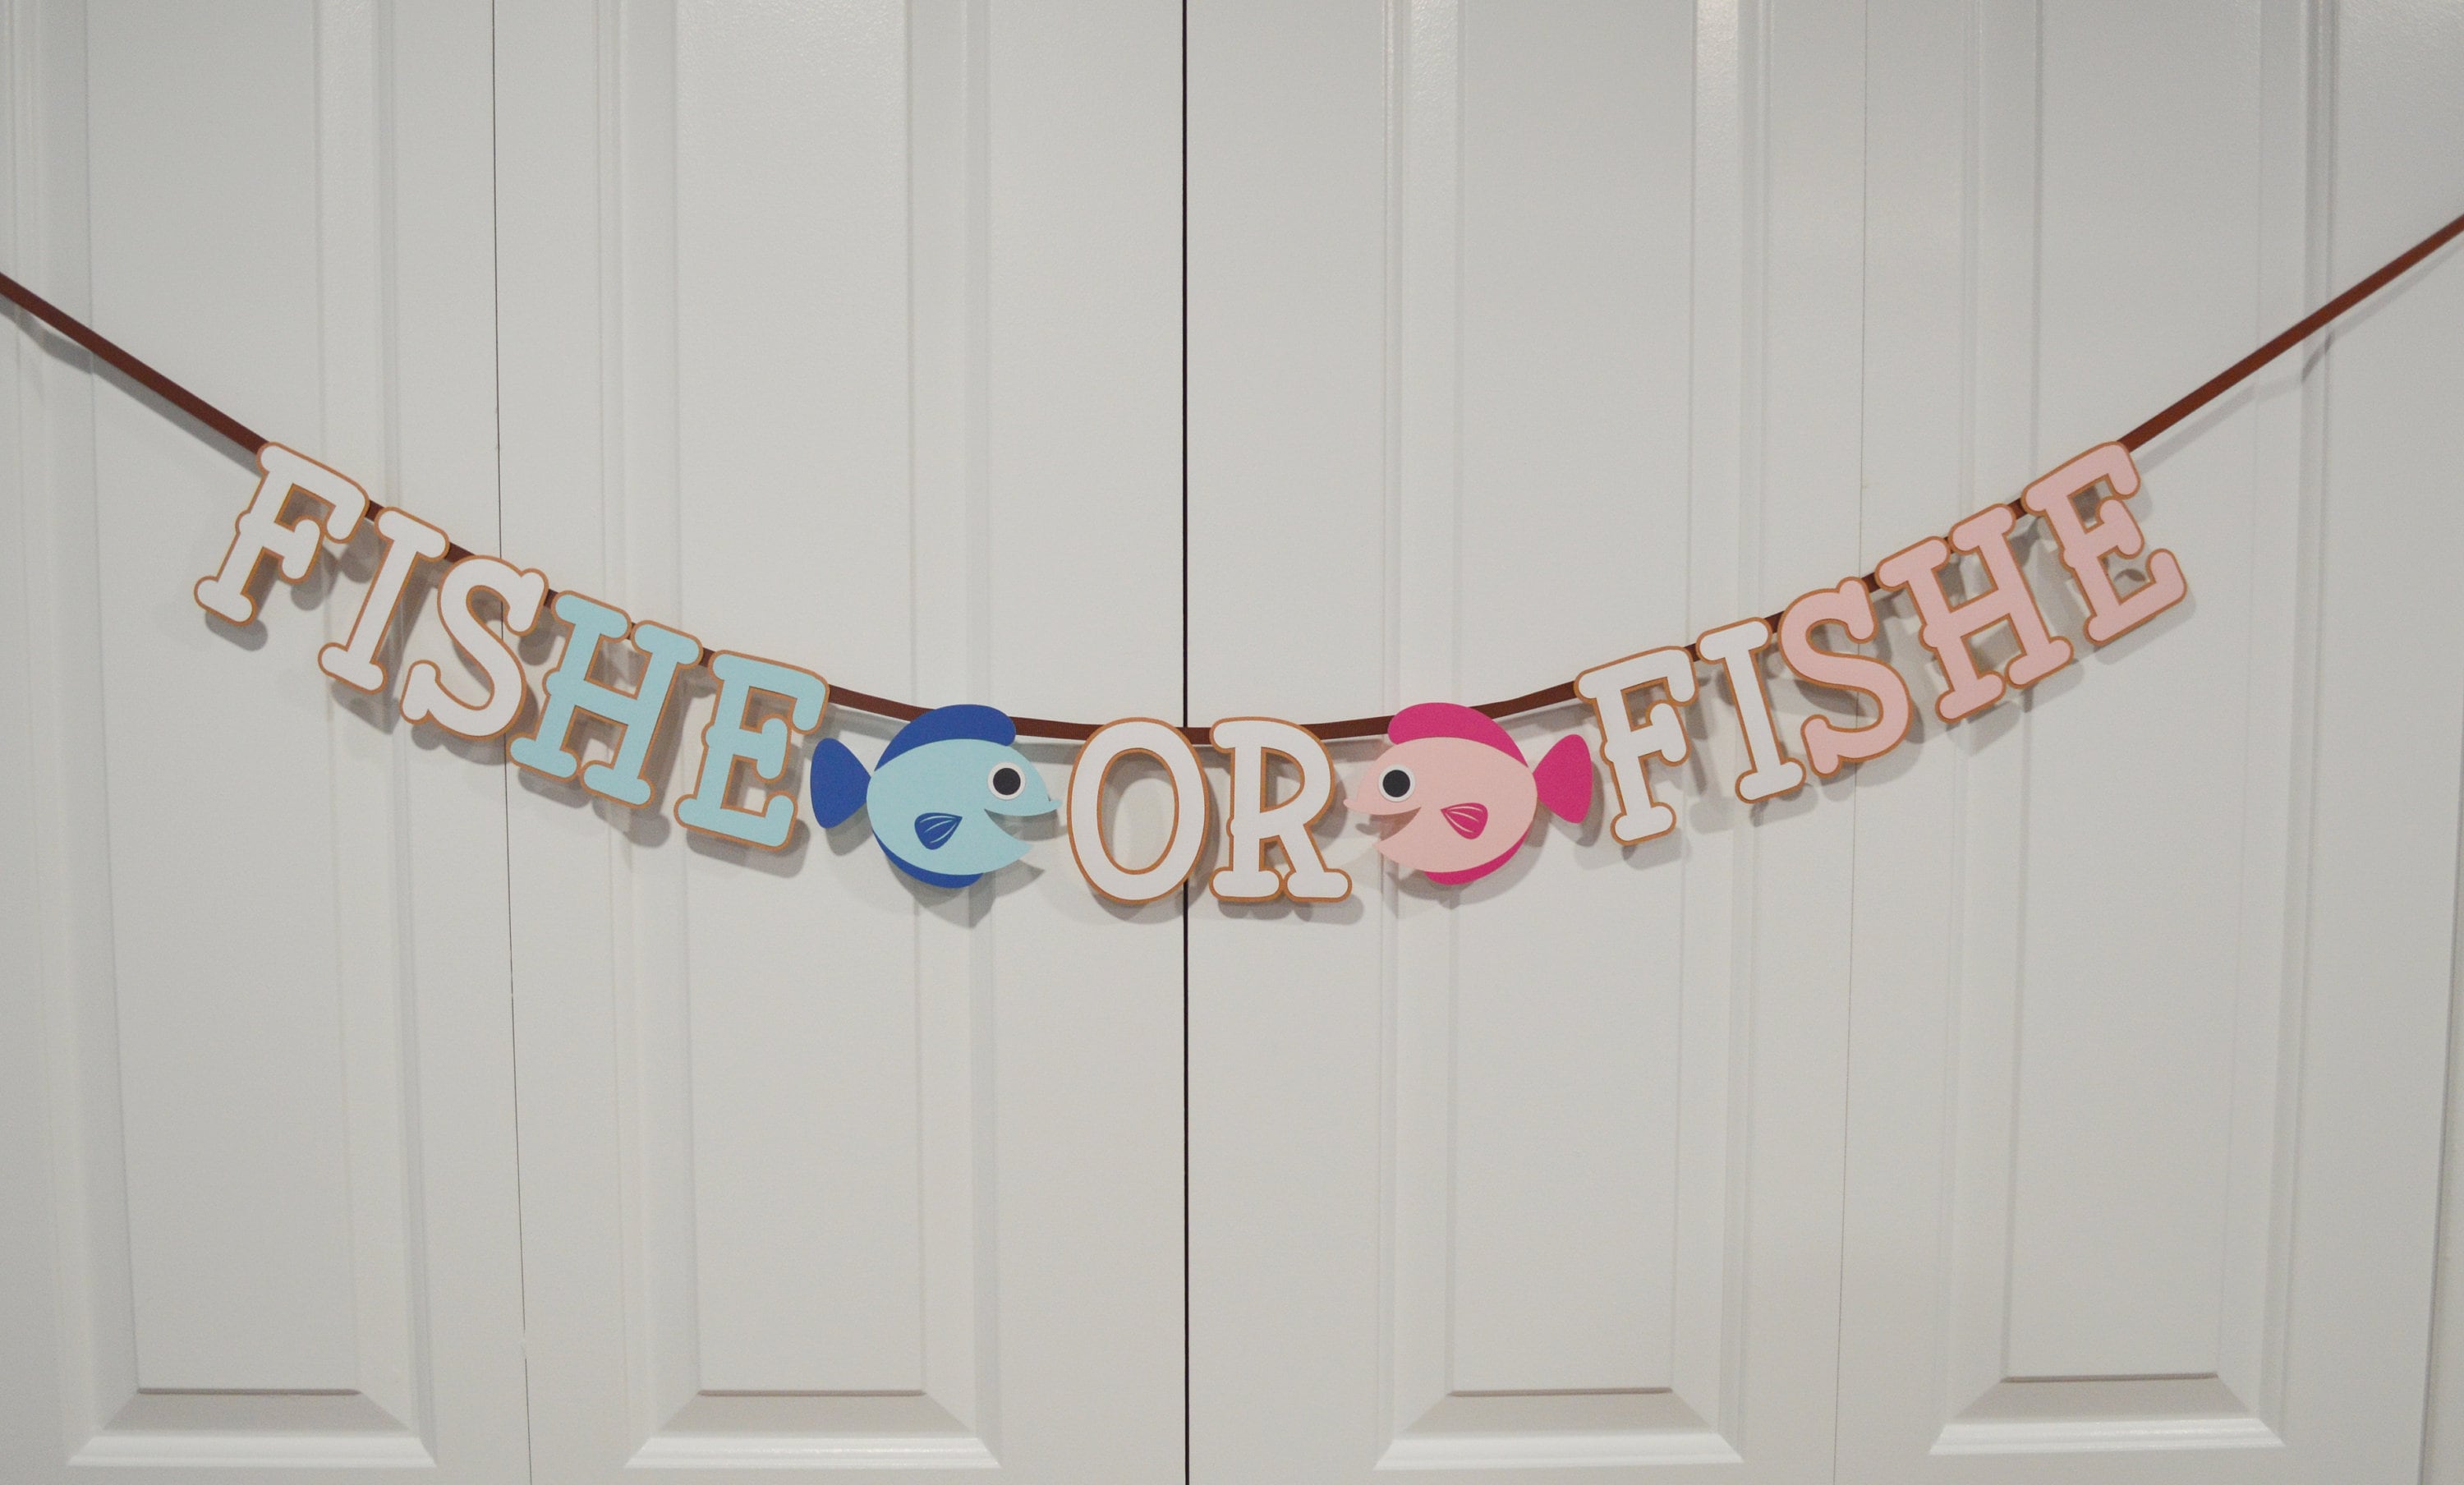 JeVenis Fishshe Or Fishhe Gender Reveal Party Supplies Gone Fishing Baby  Shower Decoration Fish She or Fish He Gender Reveal Boy or Girl Sign  Backdrop